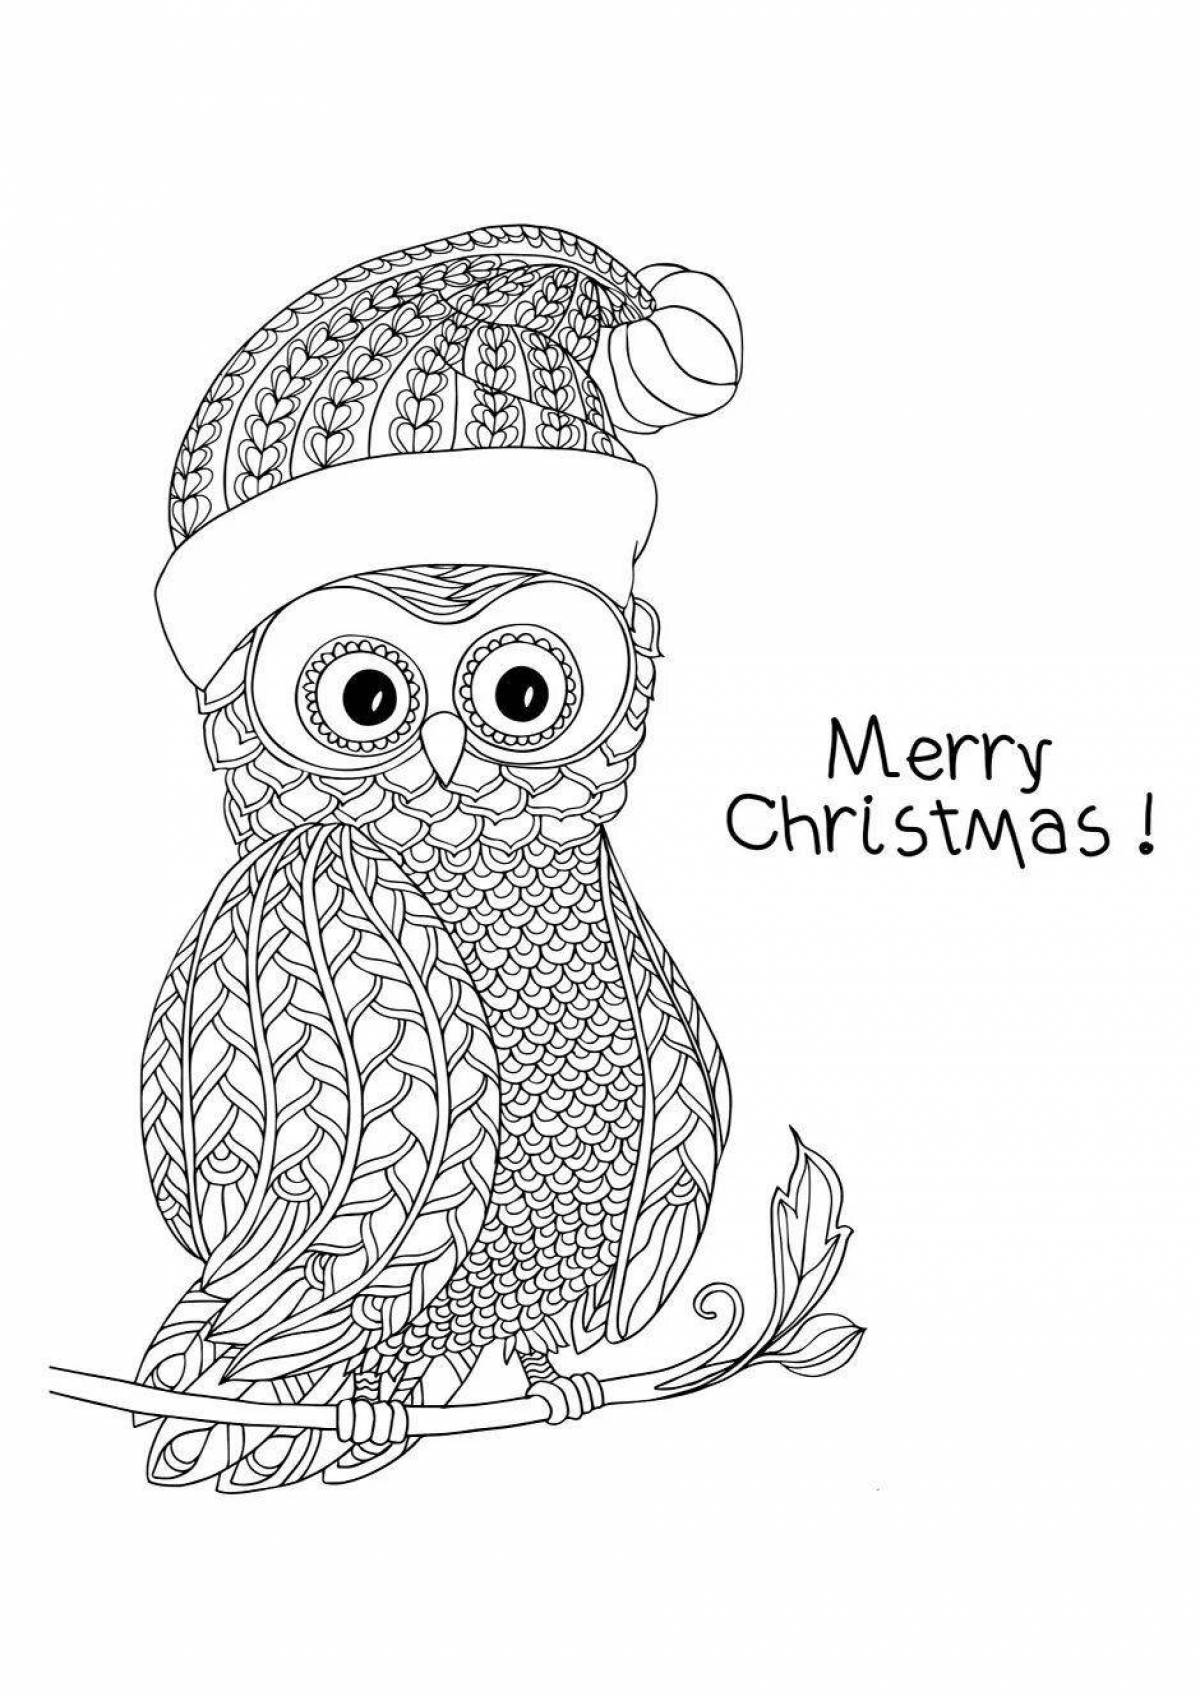 Coloring page happy christmas owl